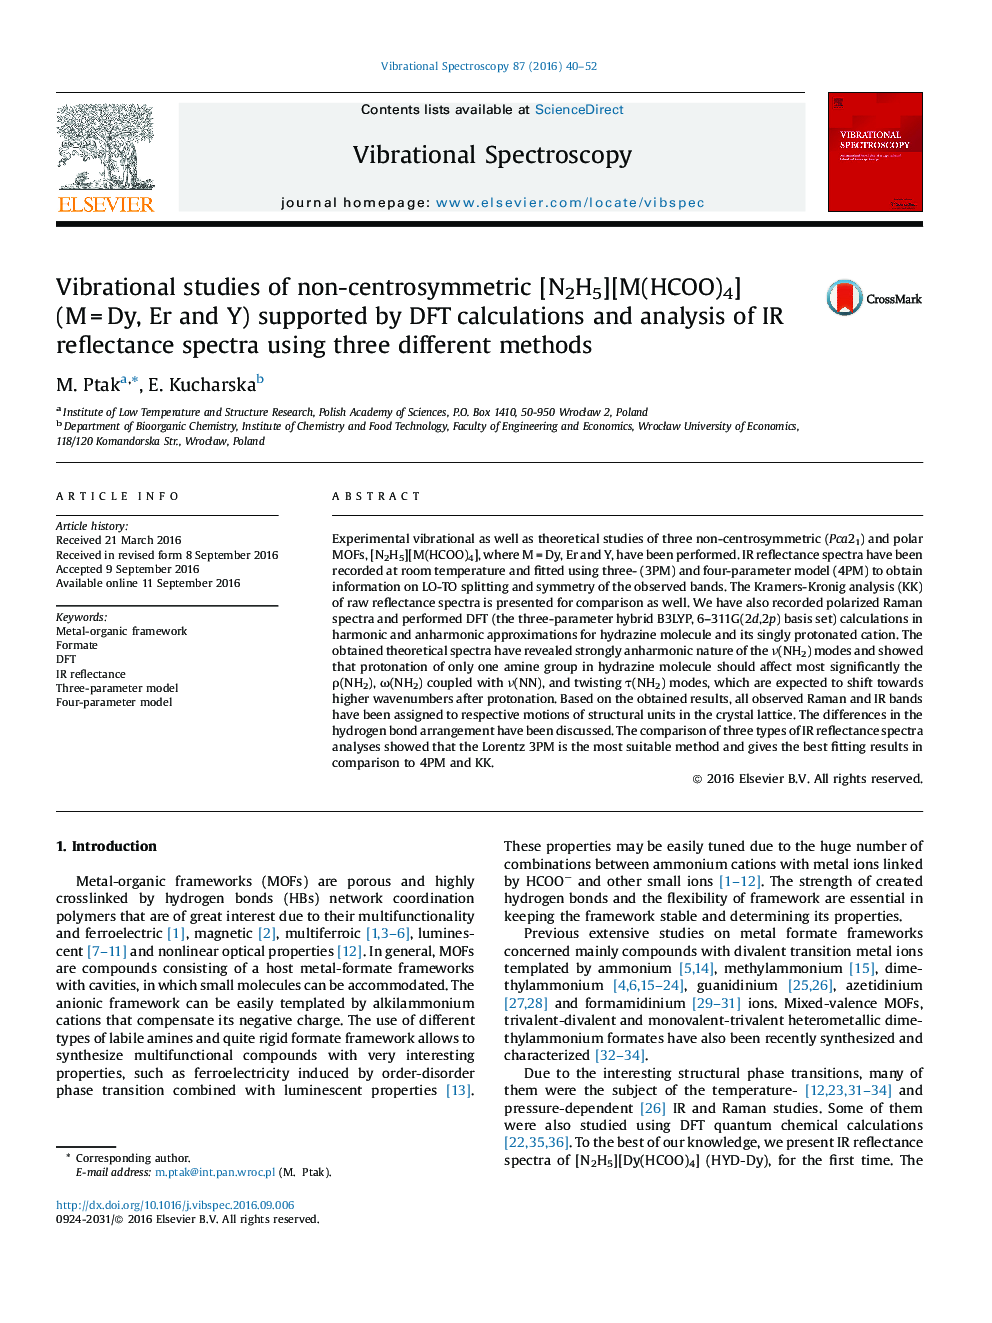 Vibrational studies of non-centrosymmetric [N2H5][M(HCOO)4] (MÂ =Â Dy, Er and Y) supported by DFT calculations and analysis of IR reflectance spectra using three different methods